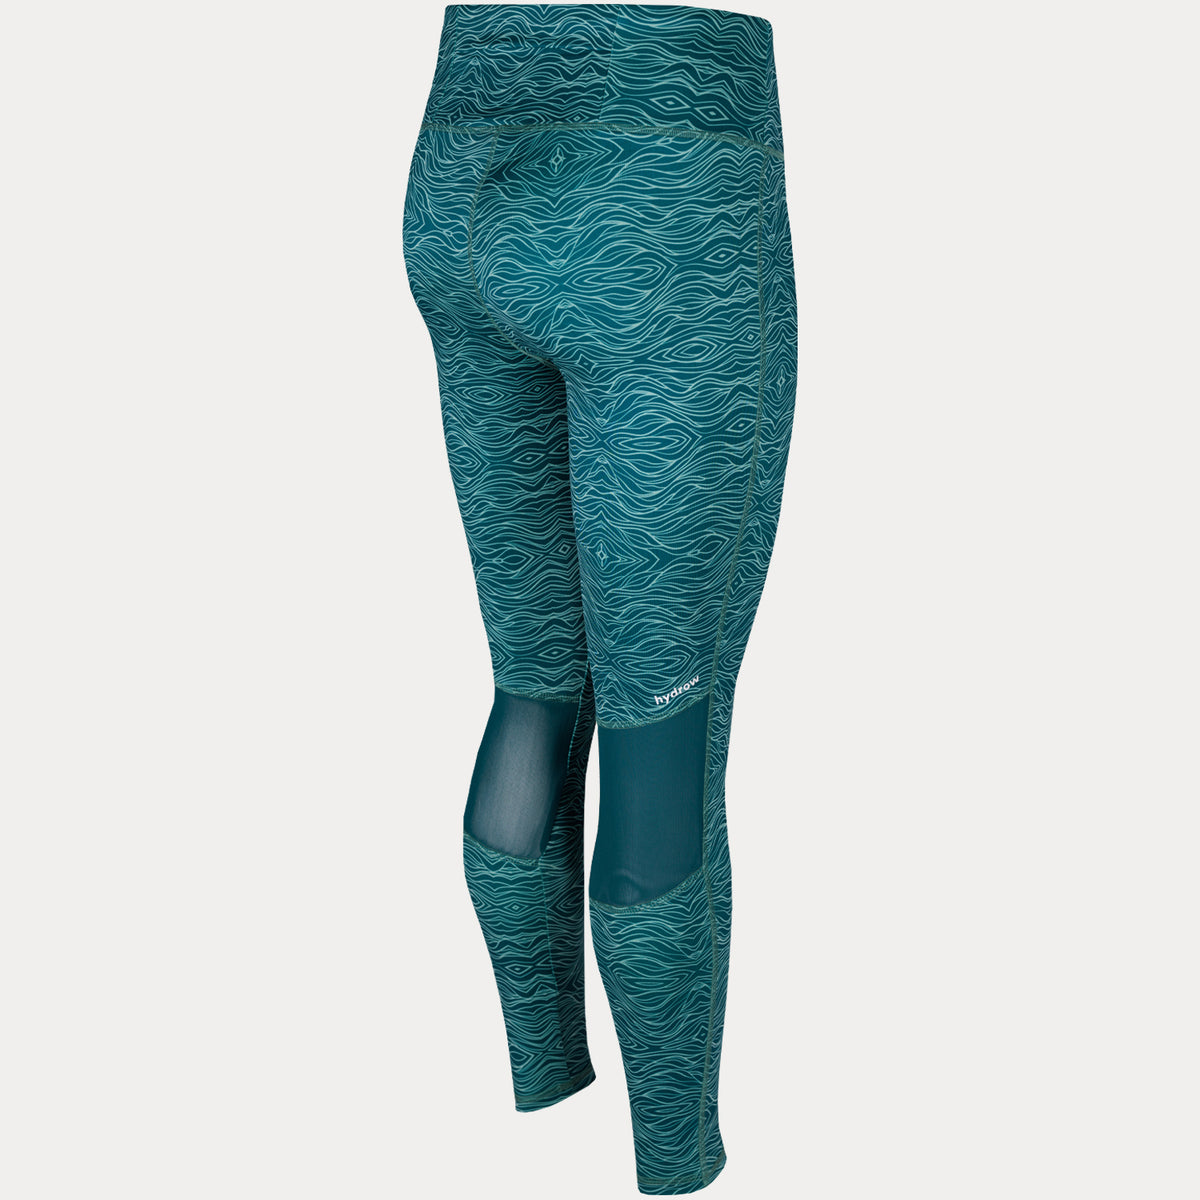 back view photo of wave pattern leggings with hydrow logo behind right knee